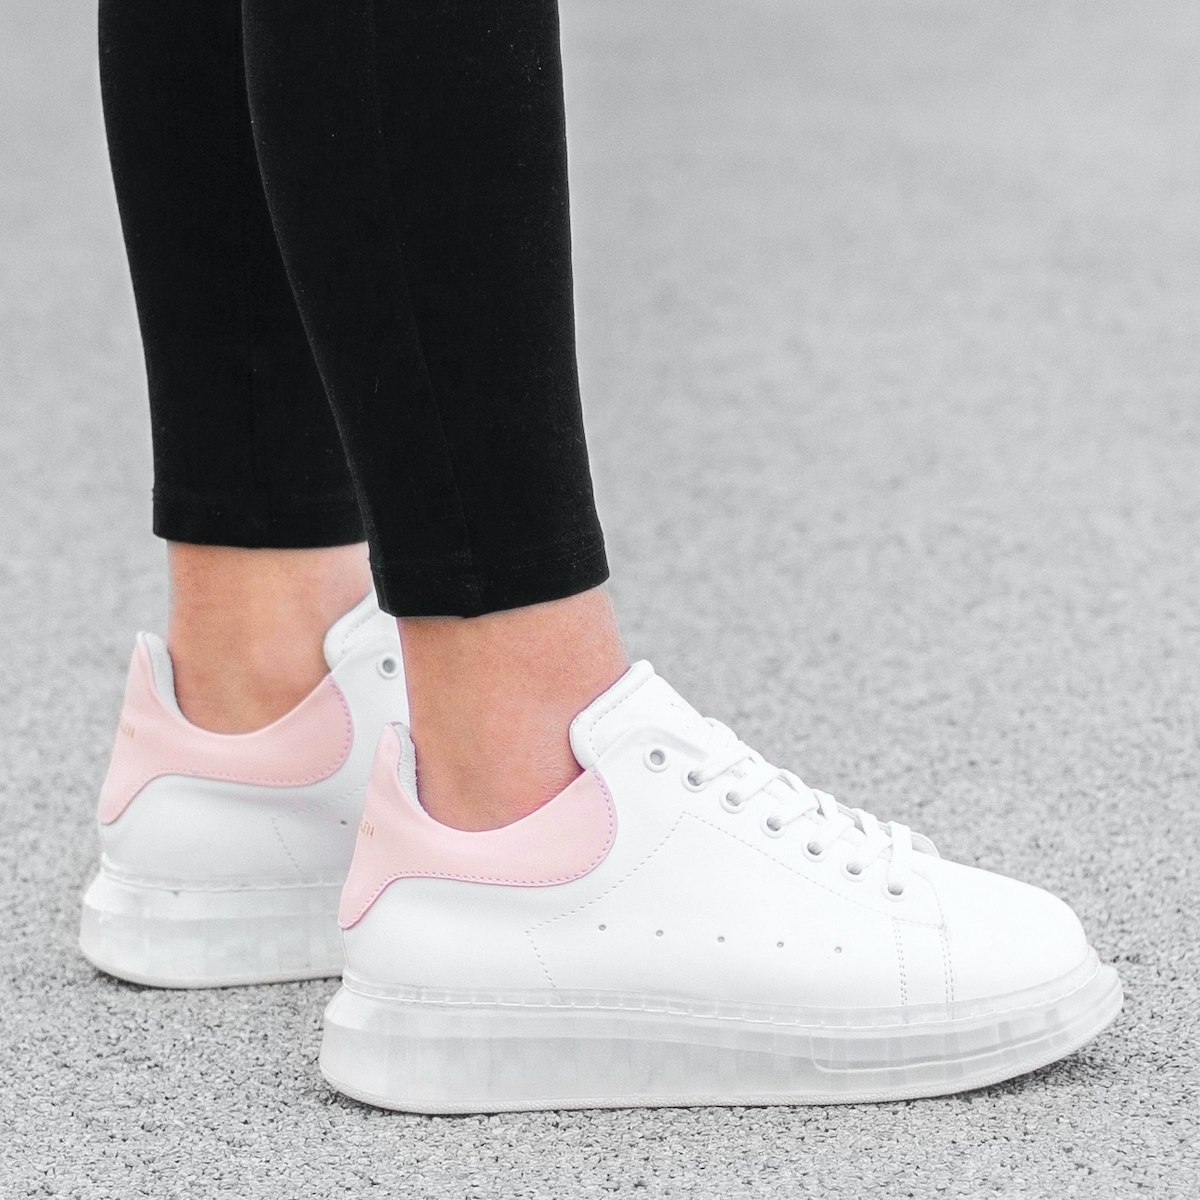 Women's O2 Transparent Hype Sole Sneakers In White-Pink - 2